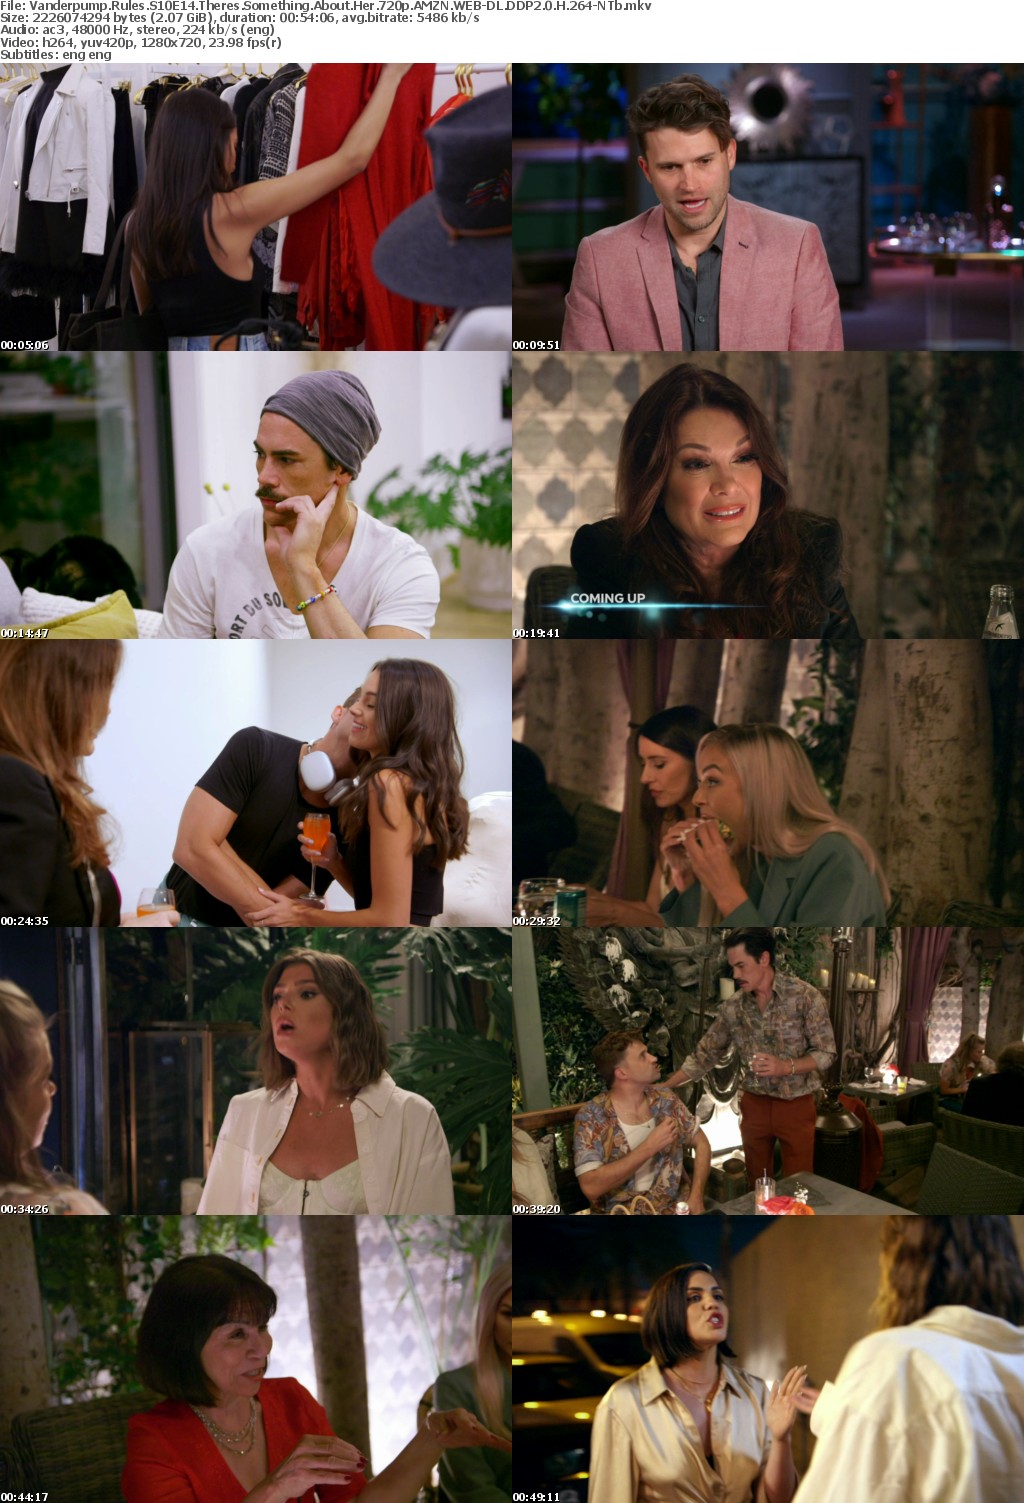 Vanderpump Rules S10E14 Theres Something About Her 720p AMZN WEBRip DDP2 0 x264-NTb